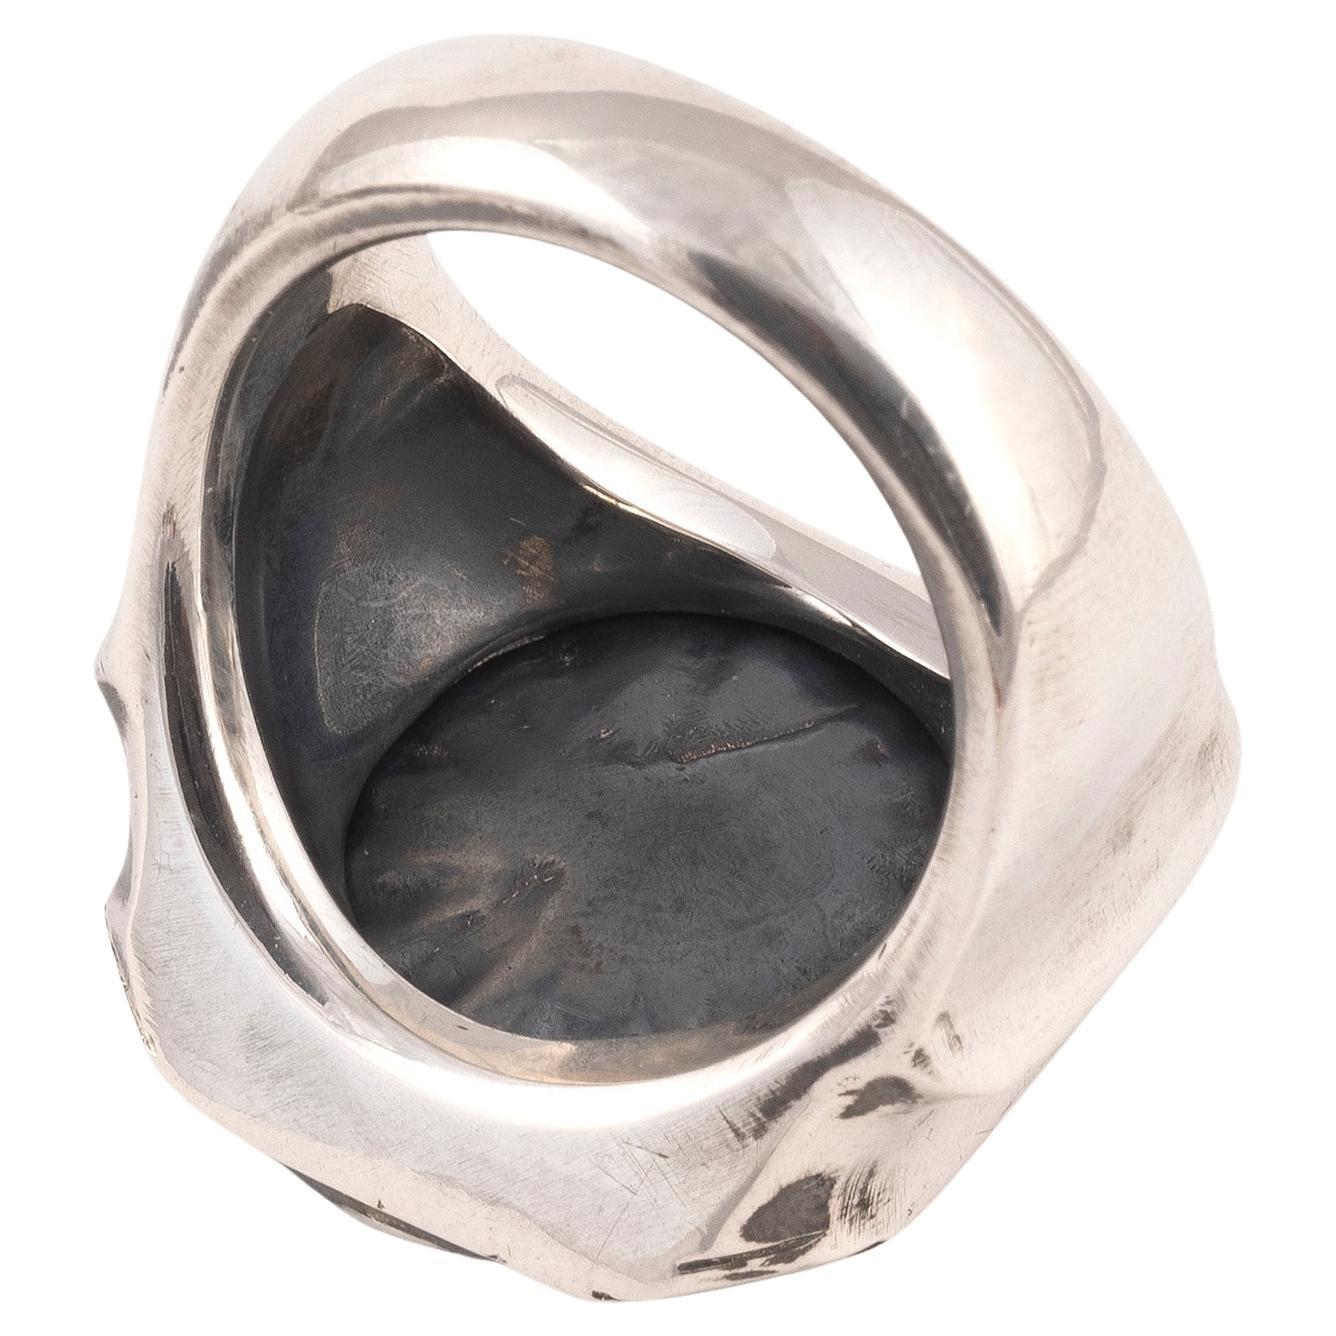 Italian, 1750s An antique silver ring is finely hand-engraved with a noble coat-of-arms. 
Top size 23mm x 21mm
Size 9 
Weight : 31gr.